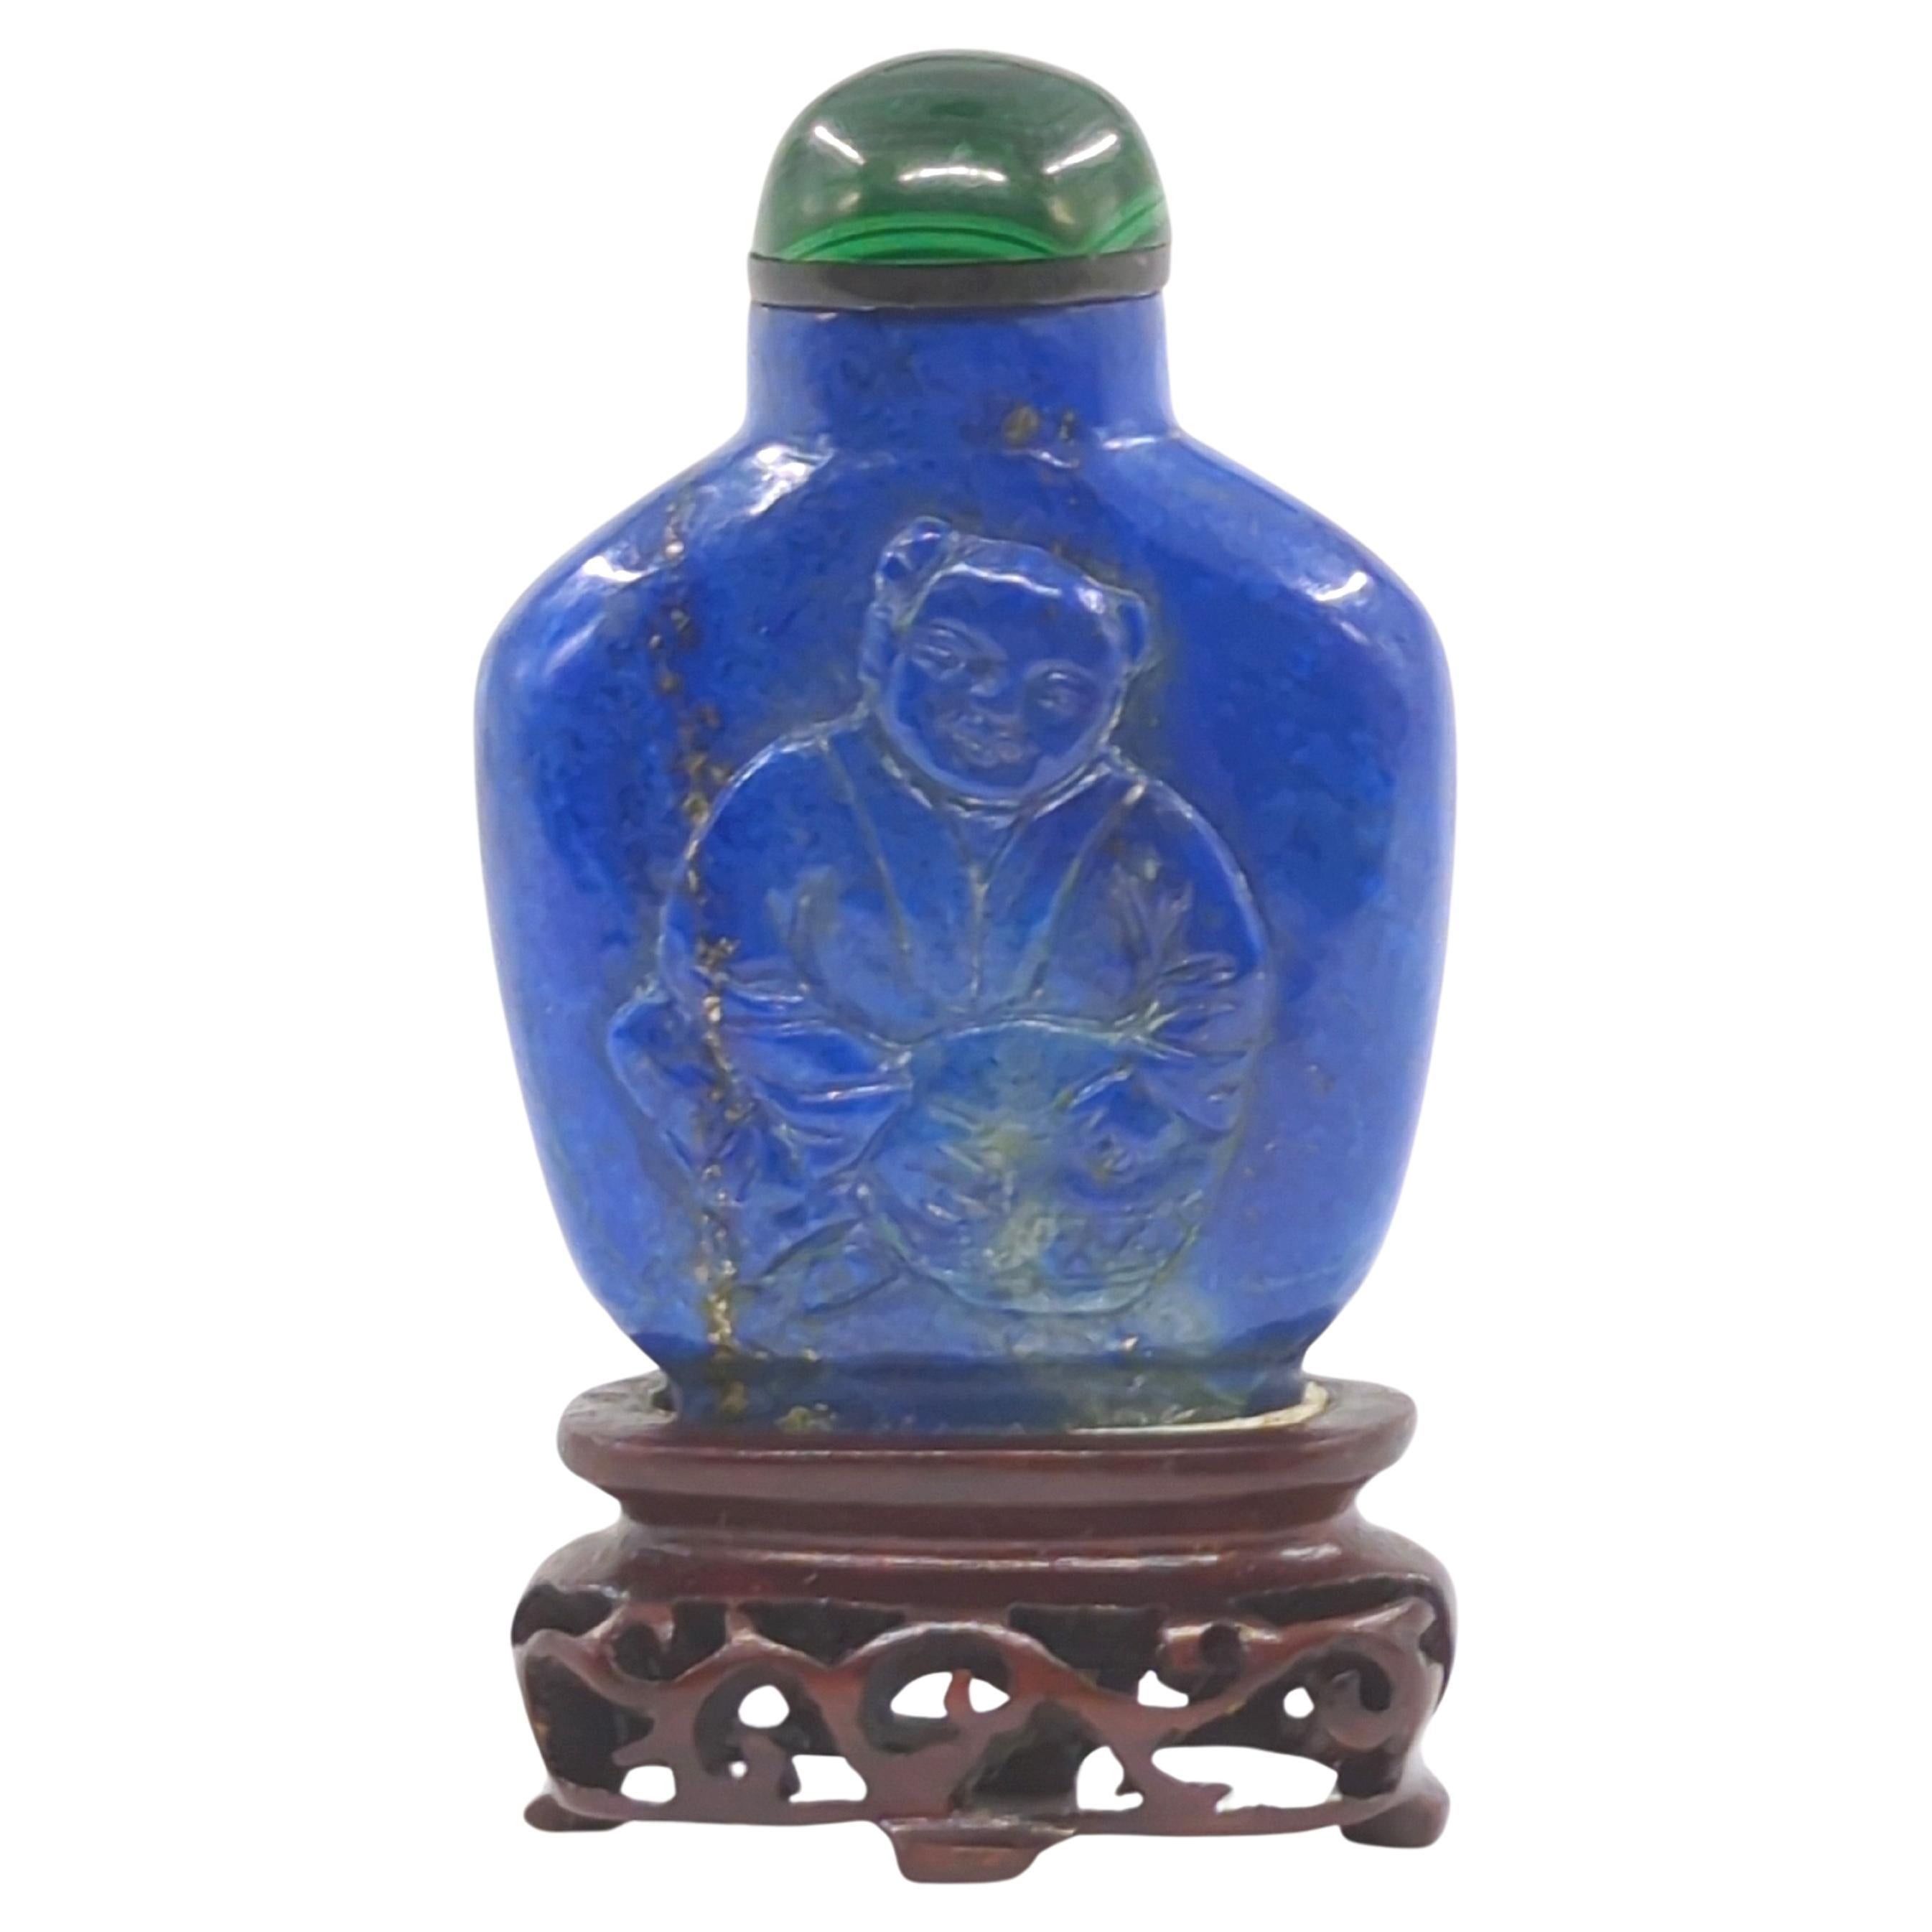 Antique Chinese Lapis Lazuli Relief Carved Snuff Bottle on Stand c.1920 For Sale 5